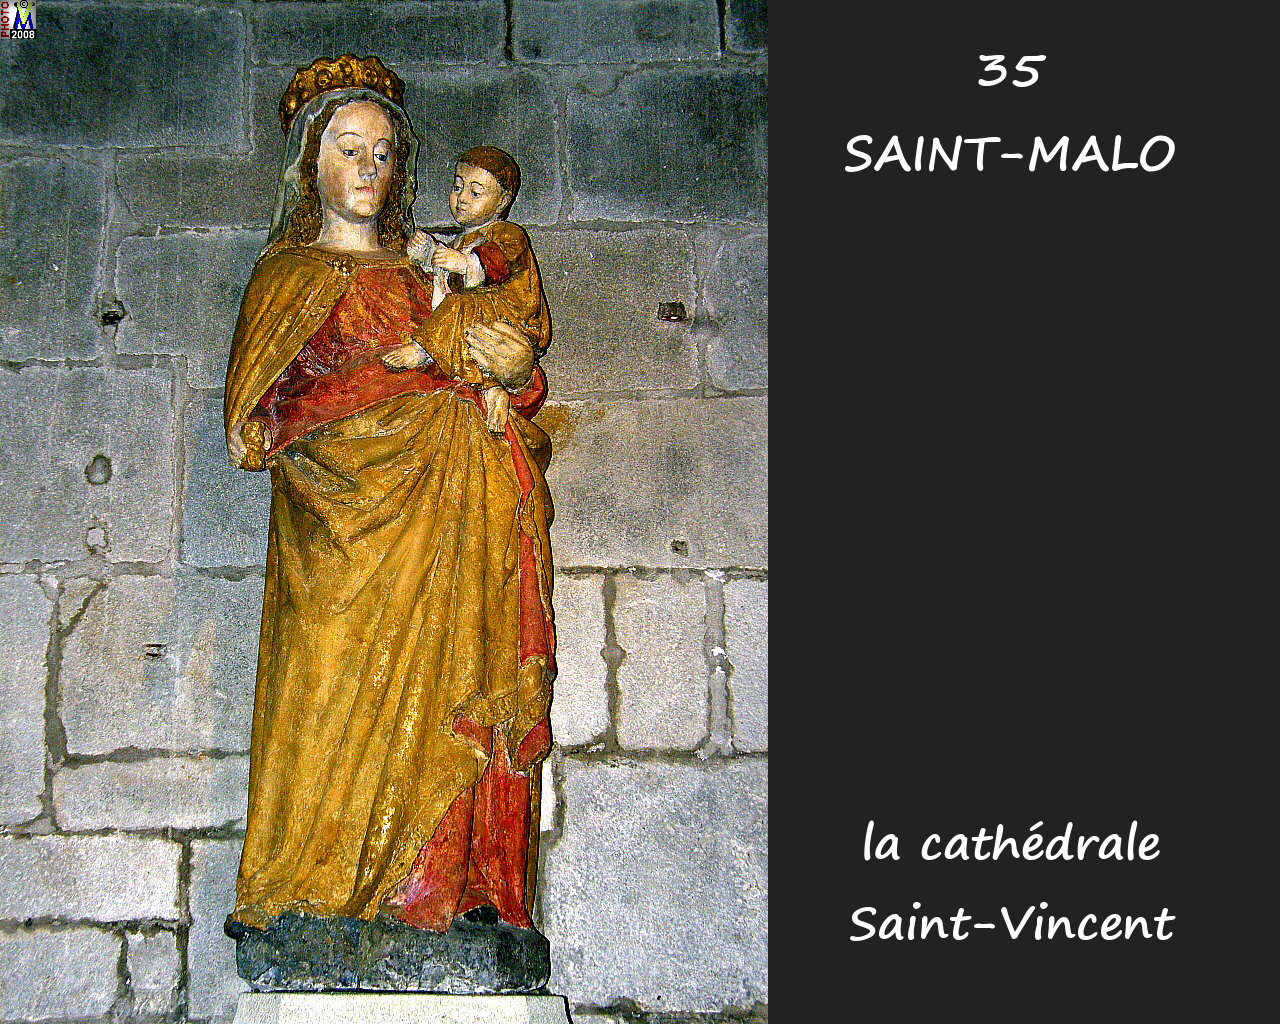 35StMALO_cathedrale_264.jpg